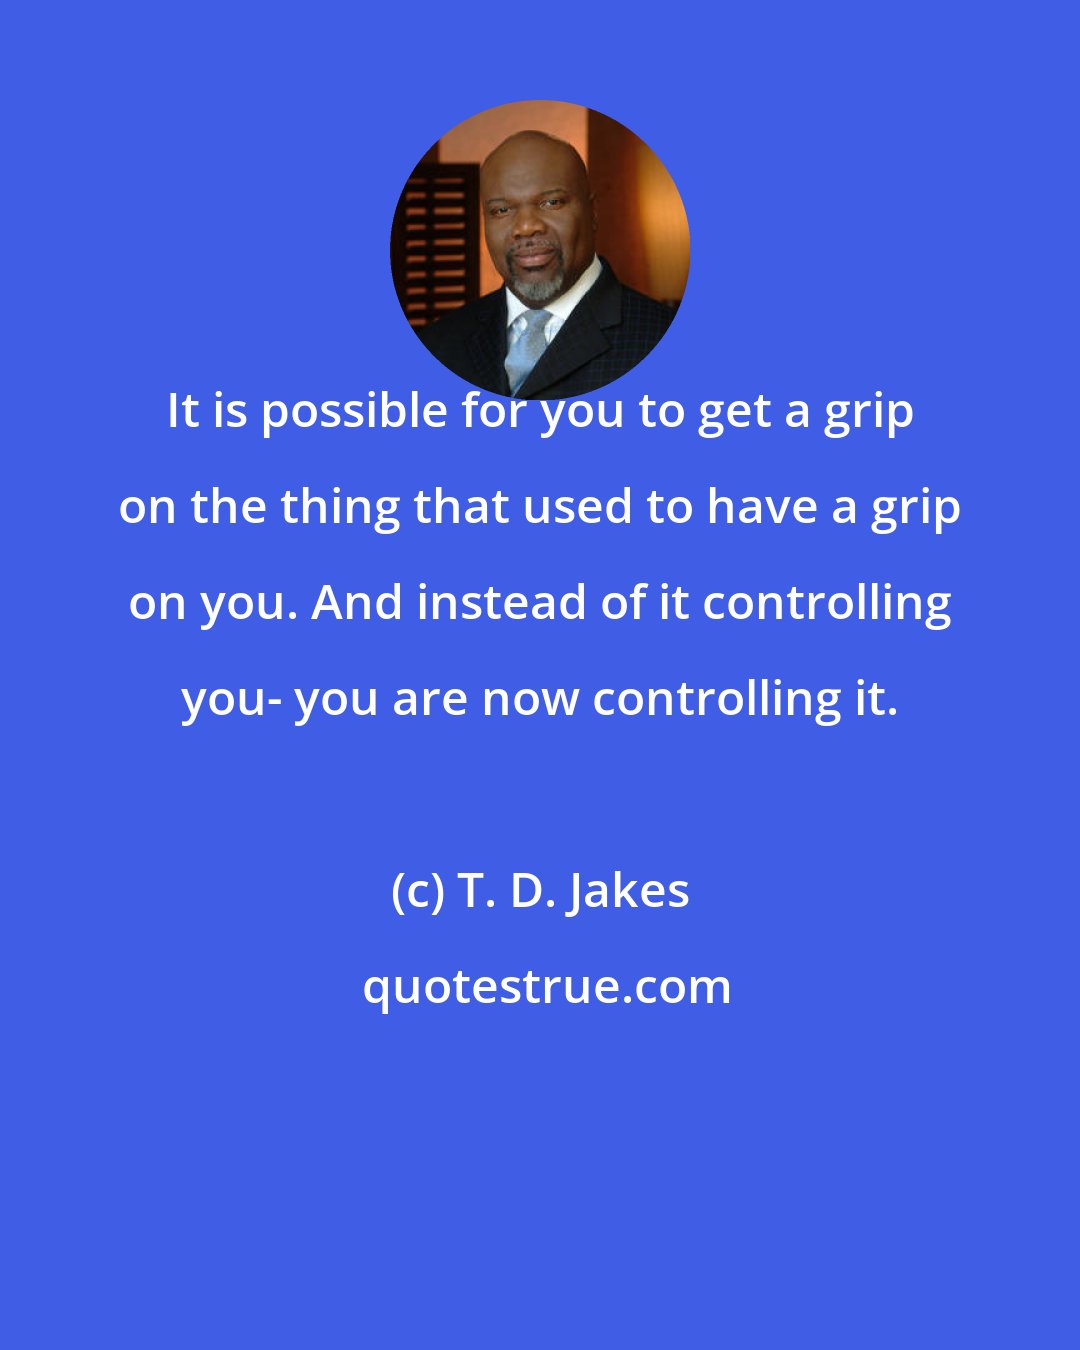 T. D. Jakes: It is possible for you to get a grip on the thing that used to have a grip on you. And instead of it controlling you- you are now controlling it.